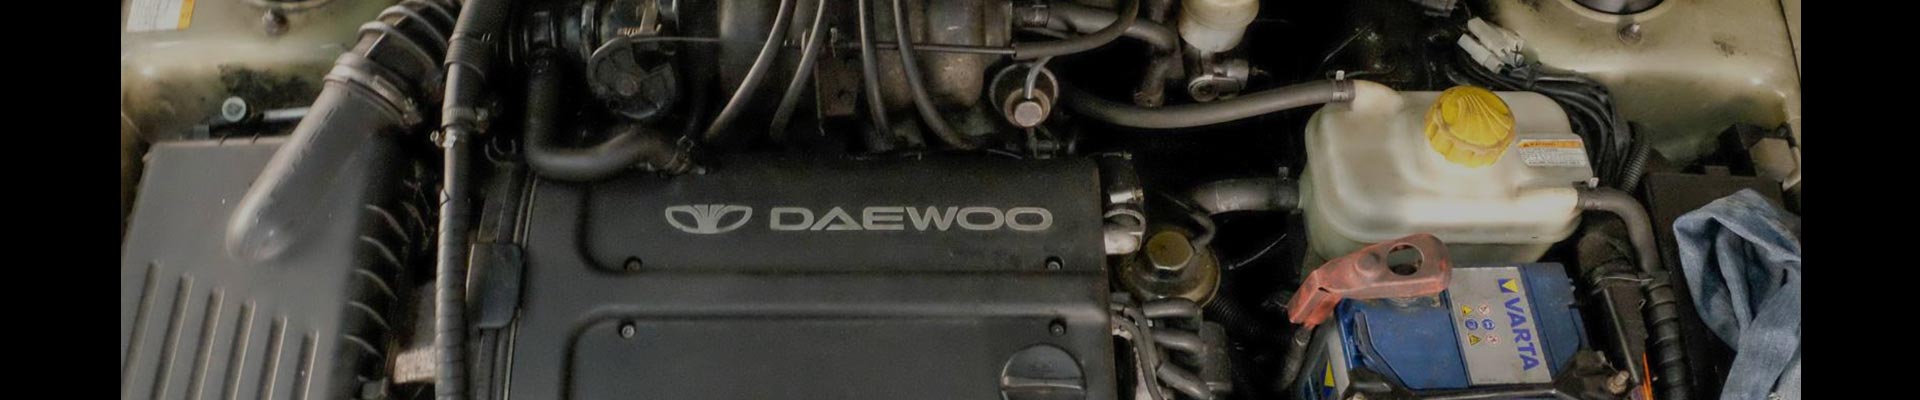 Shop Replacement 2002 Daewoo Lanos Parts with Discounted Price on the Net